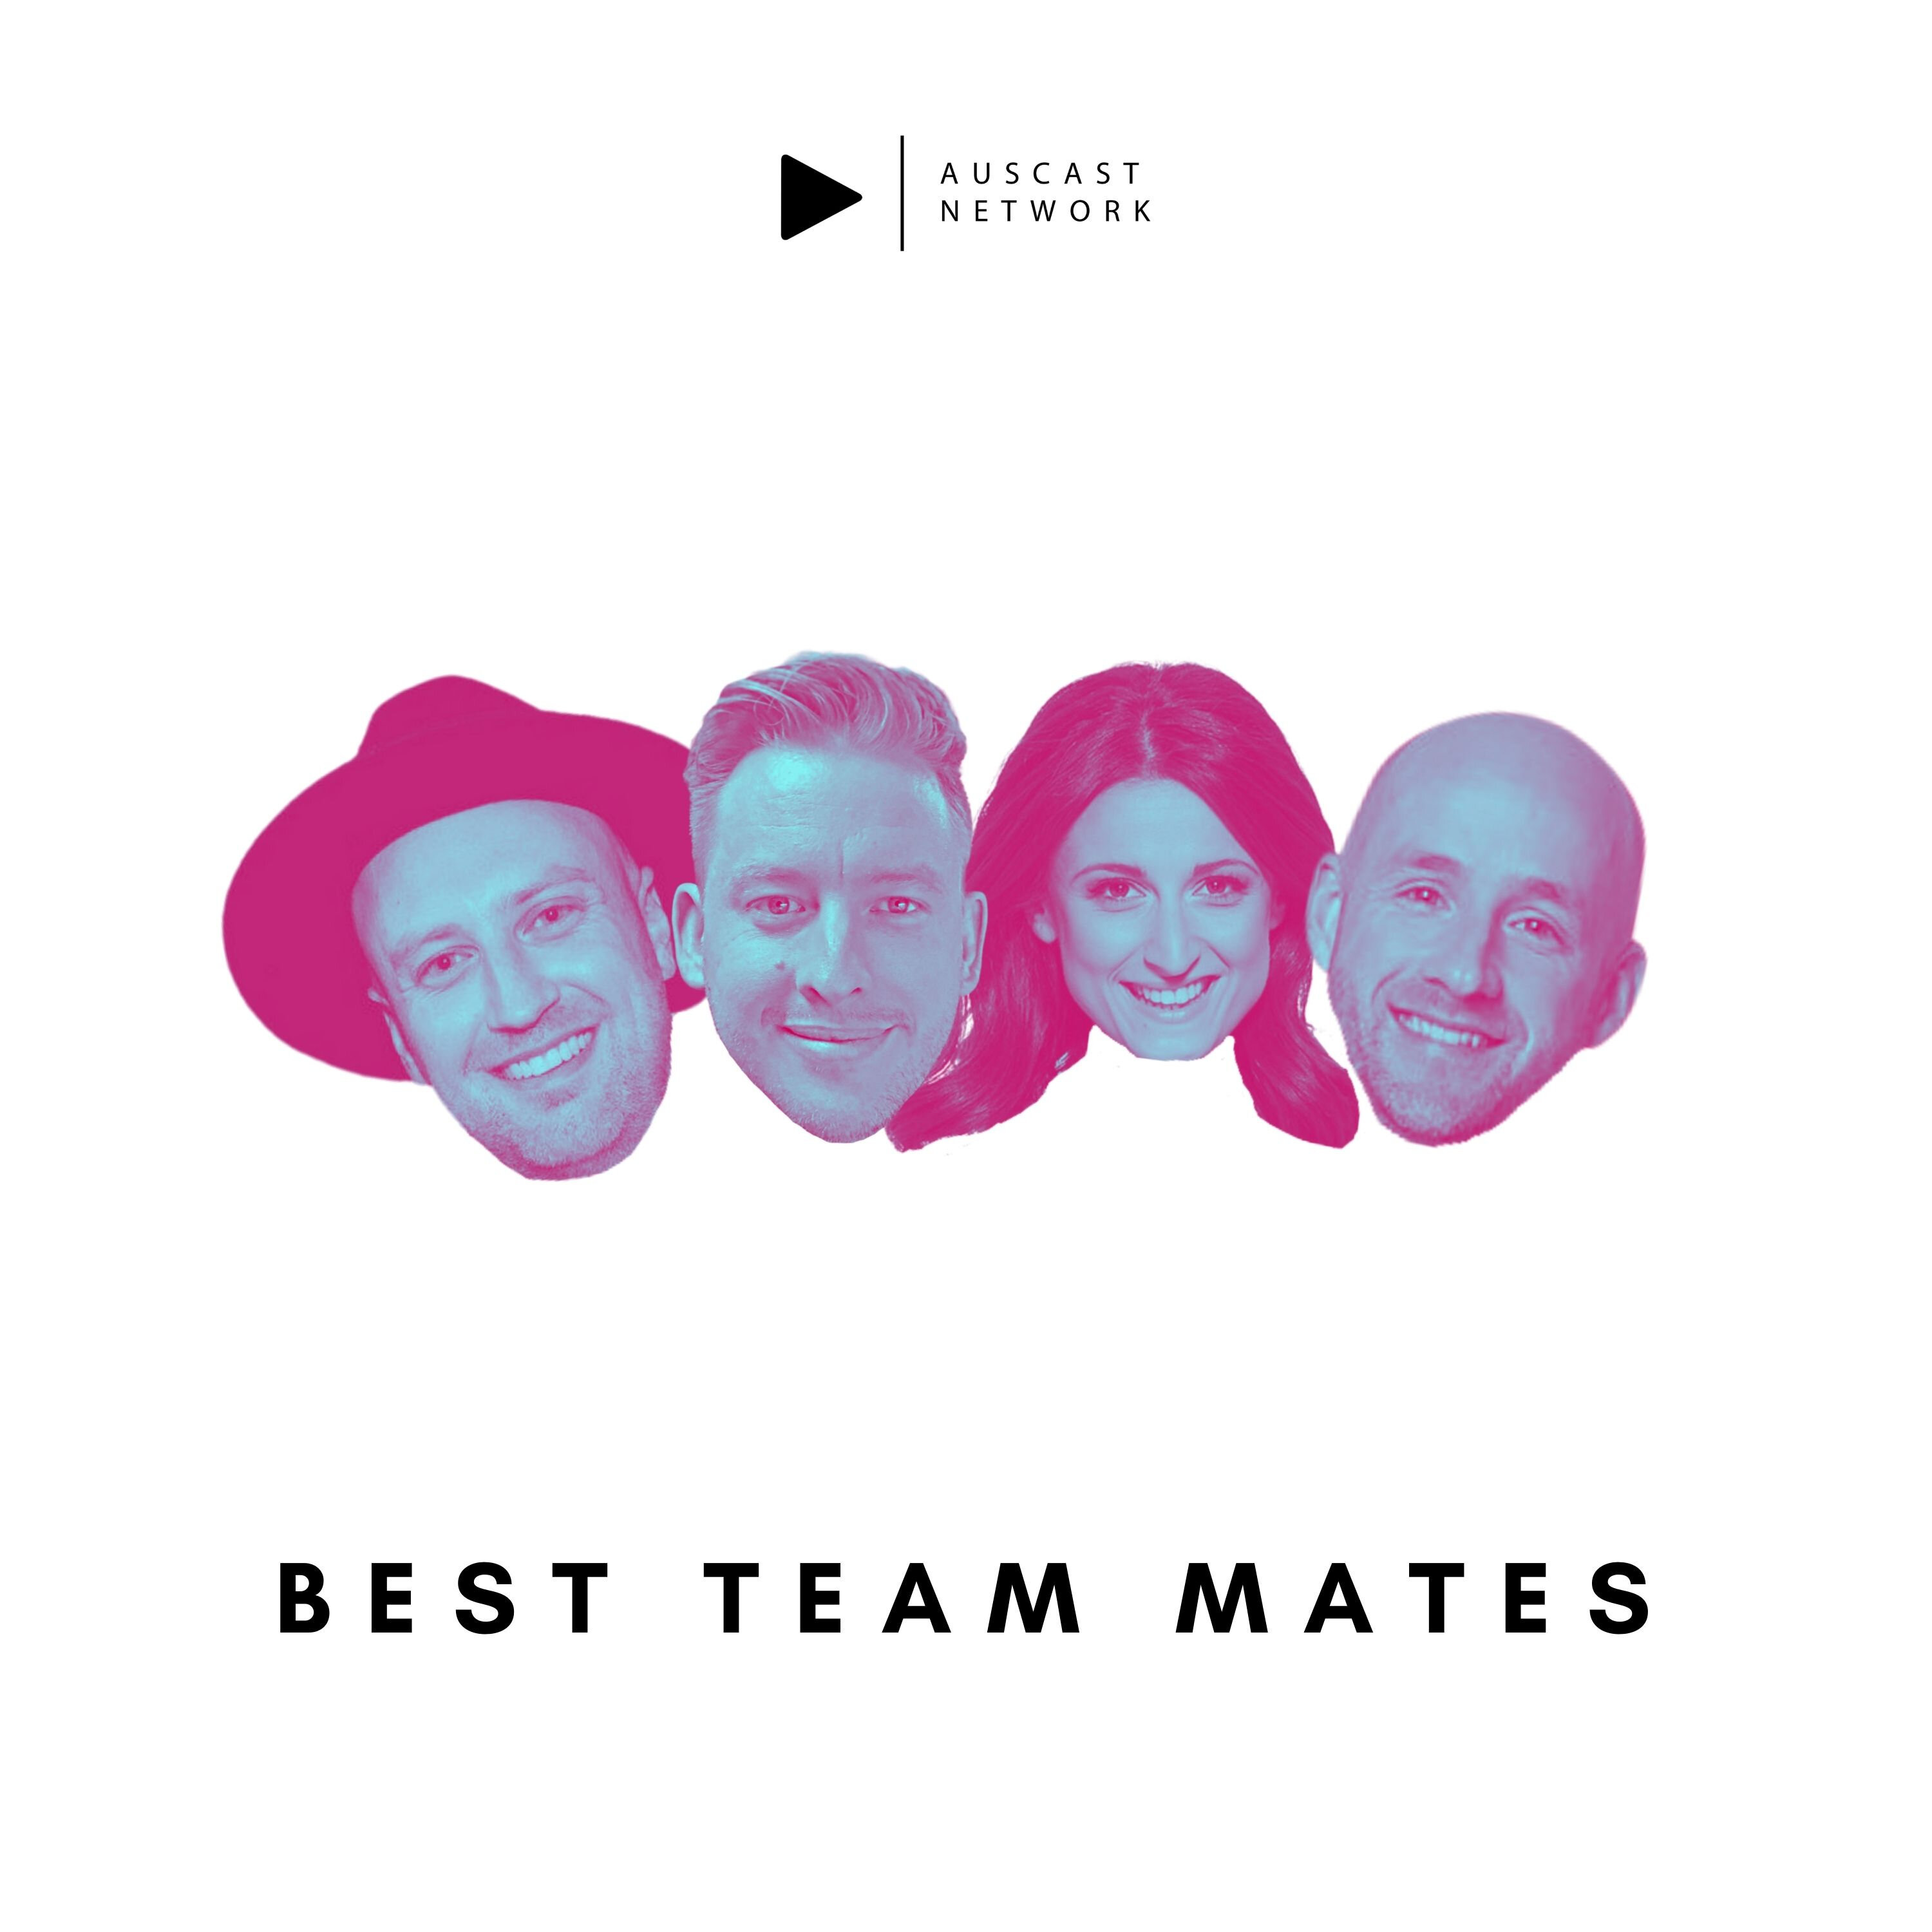 A Big Move, A NEW SHIFTY SOUND, Threesome and More - Best Team Mates